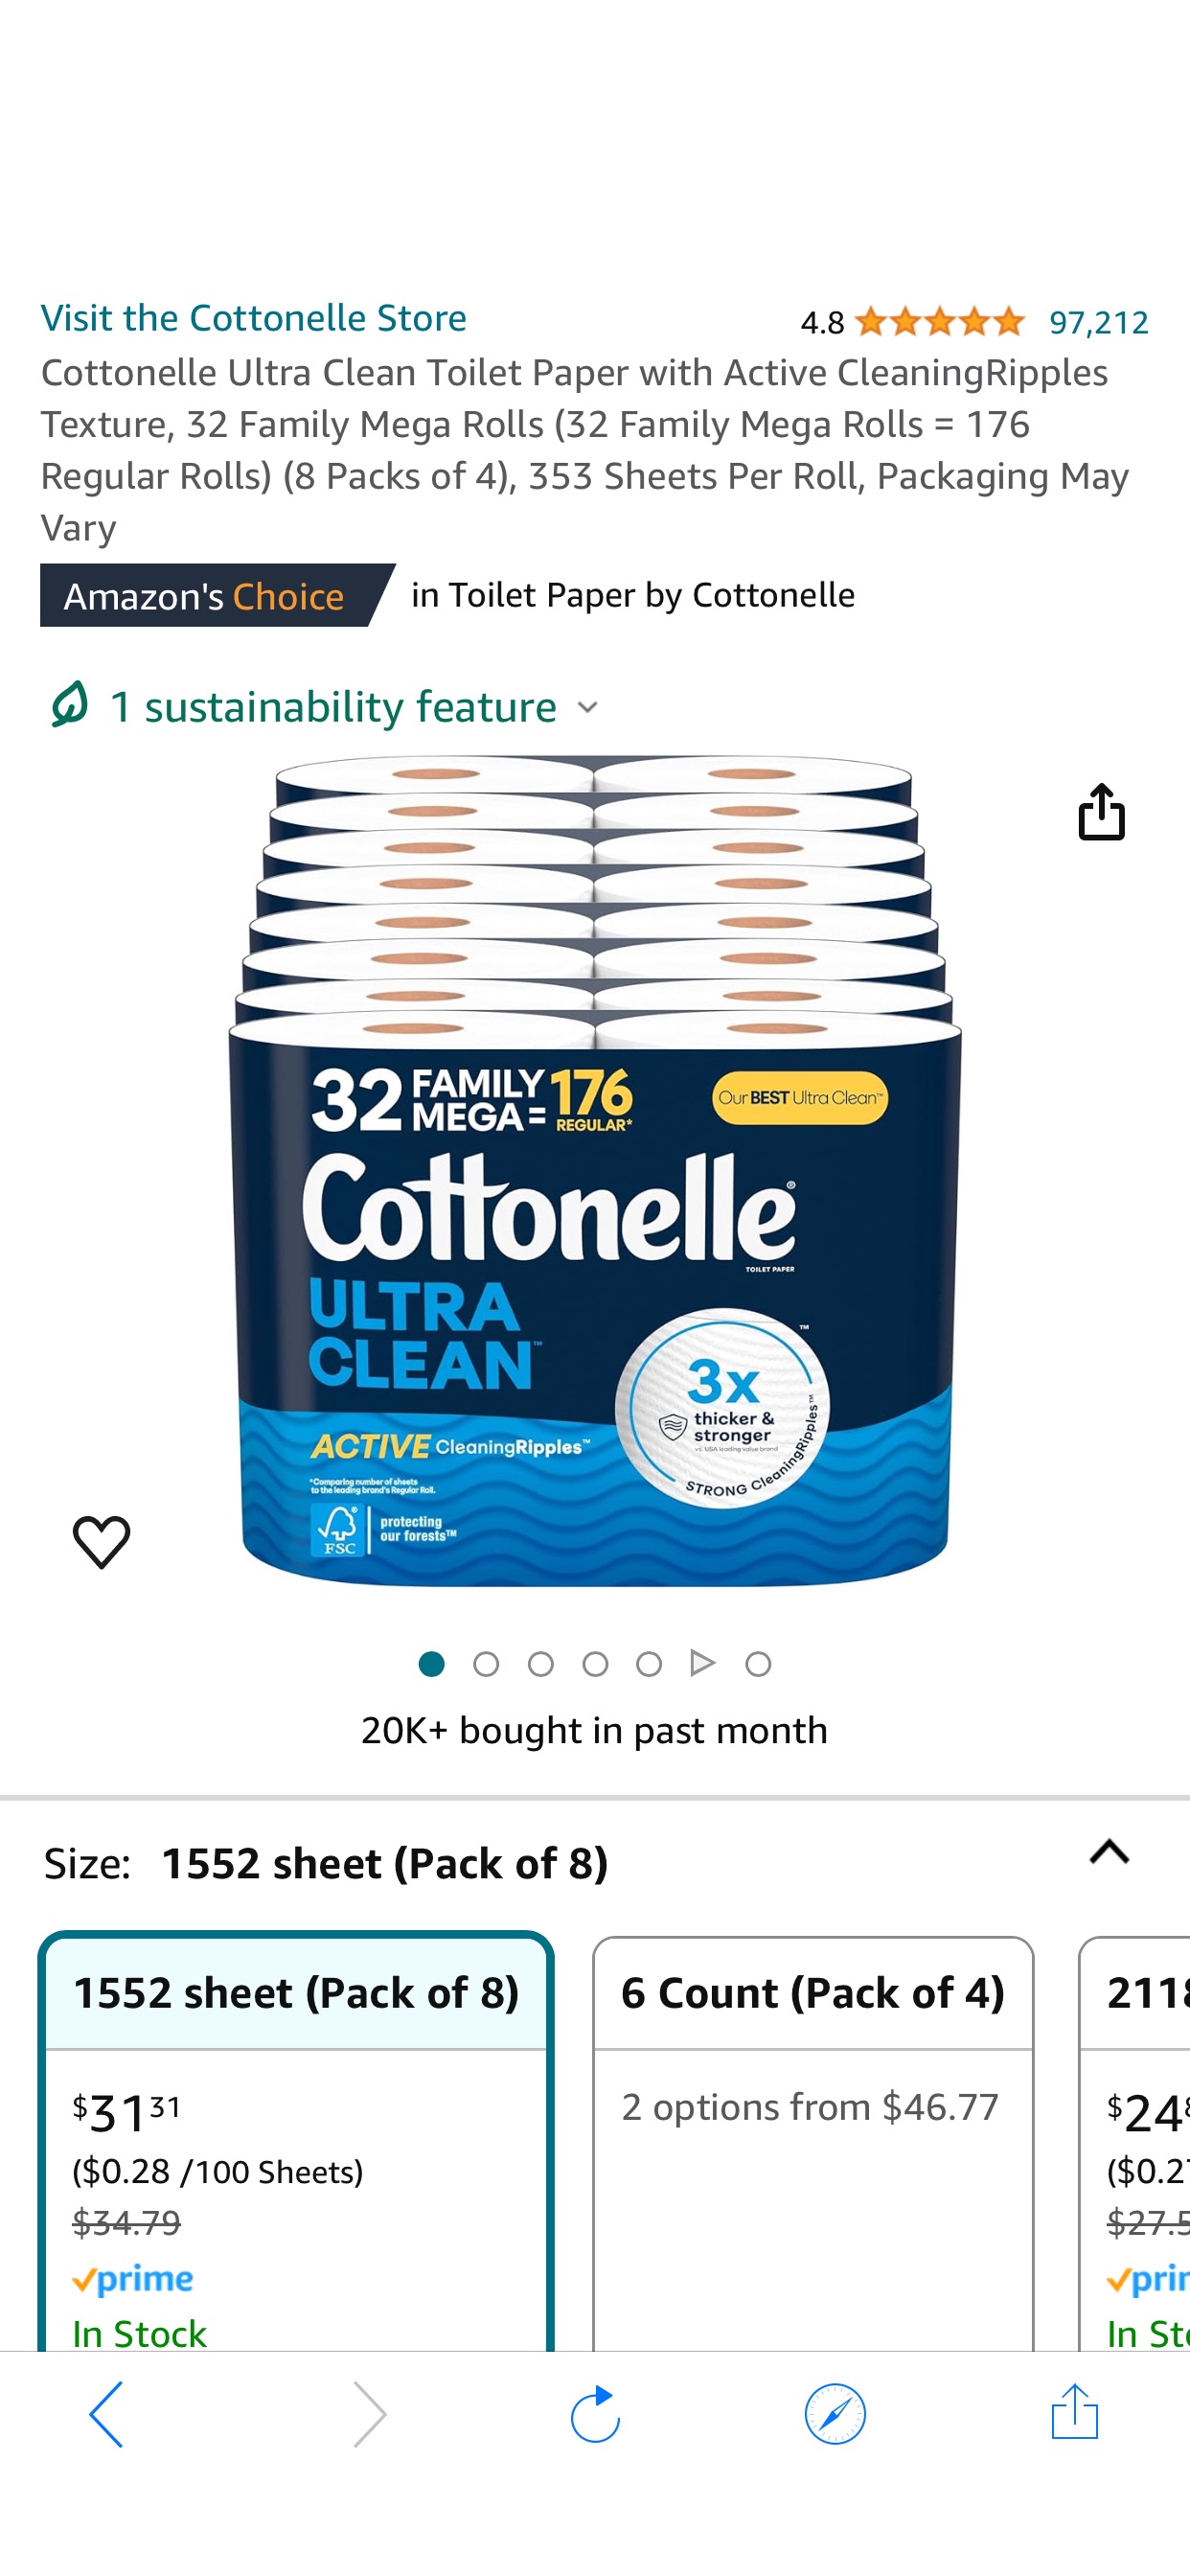 Amazon.com: Cottonelle Ultra Clean Toilet Paper with Active CleaningRipples Texture, 32 Family Mega Rolls (32 Family Mega Rolls = 176 Regular Rolls) (8 Packs of 4), 353 Sheets Per Roll, Packaging May 